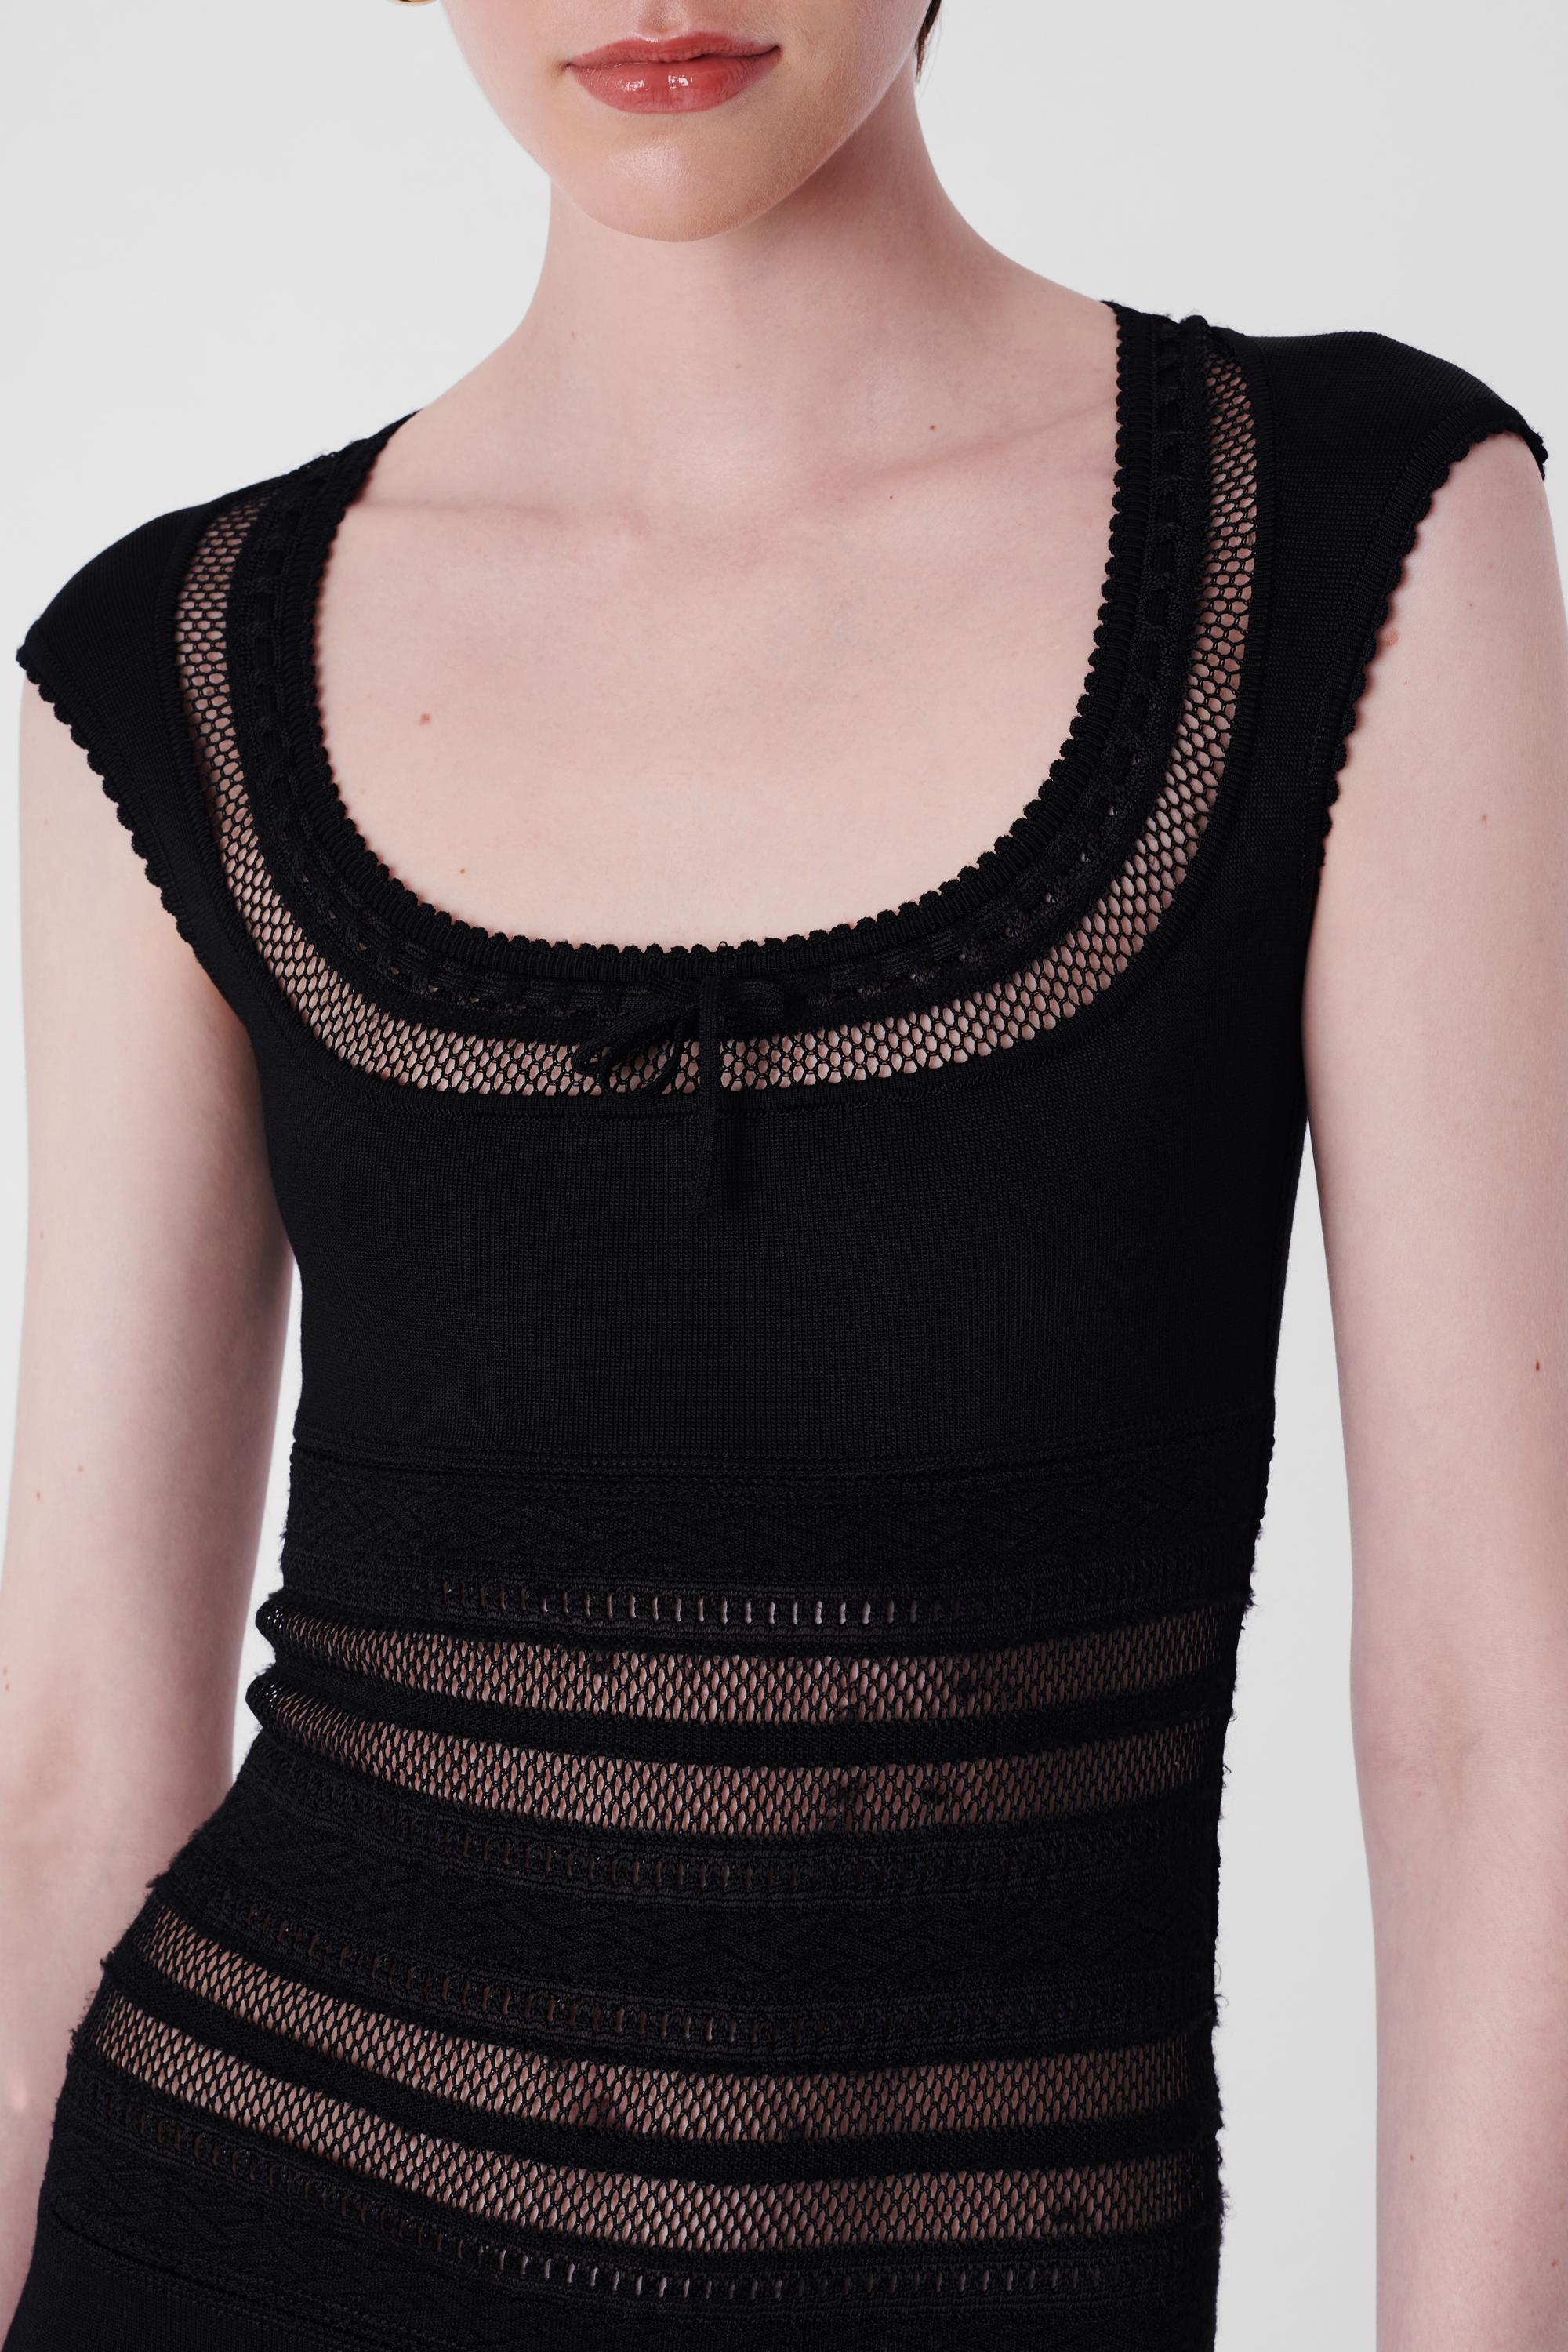 Alaia 1993 Black Mesh Cutout Bodycon Dress. In Excellent Condition For Sale In London, GB